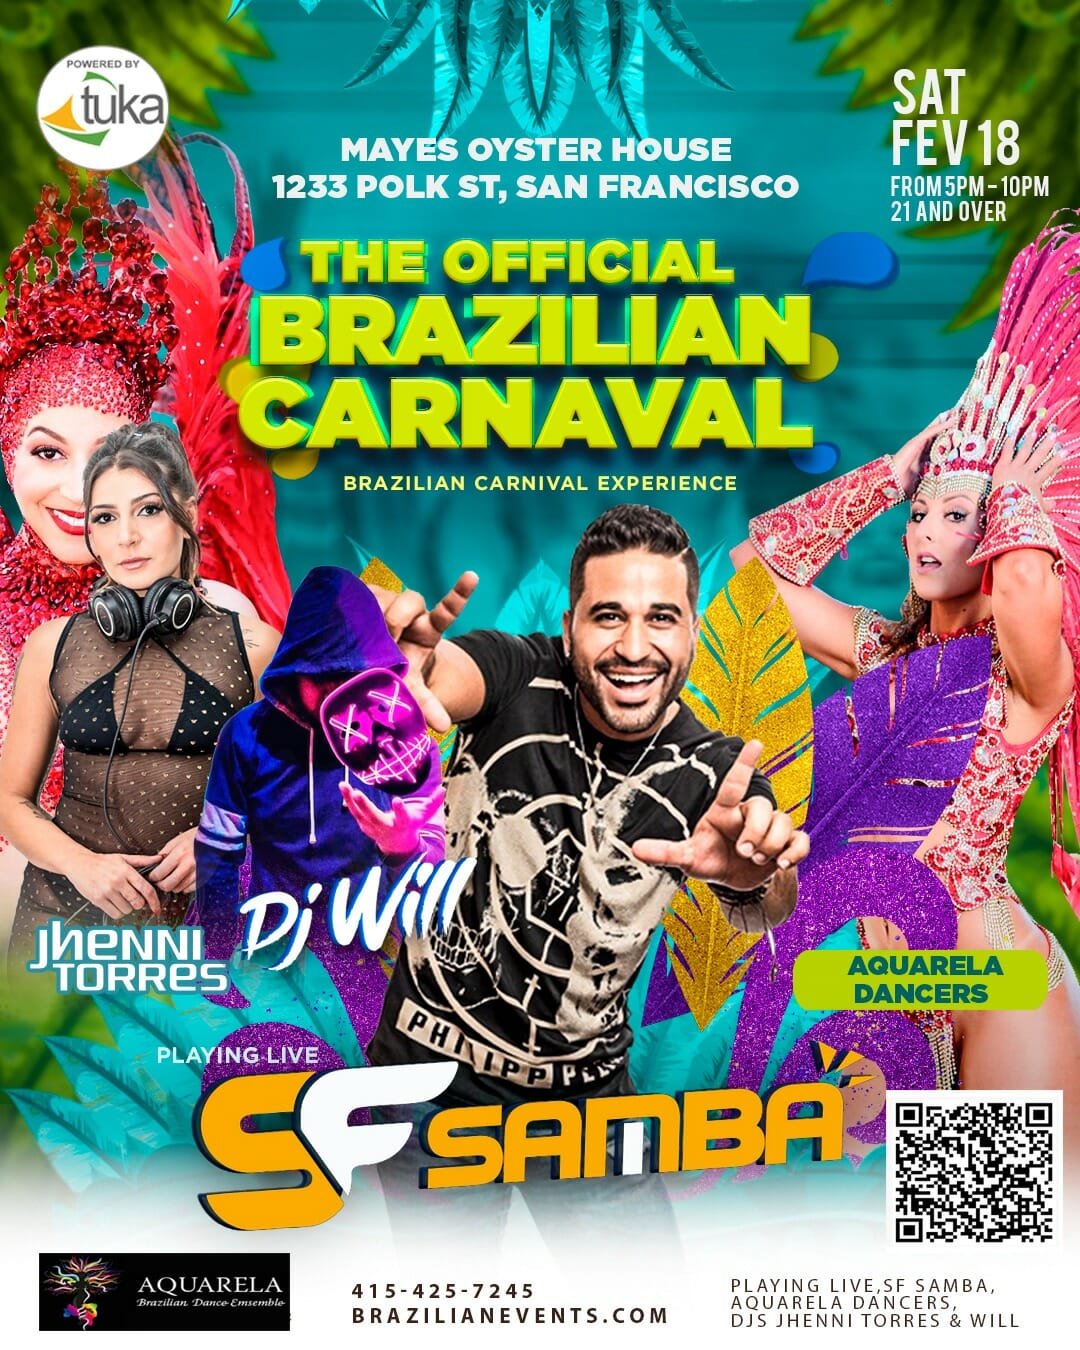 The Official Brazilian Carnaval